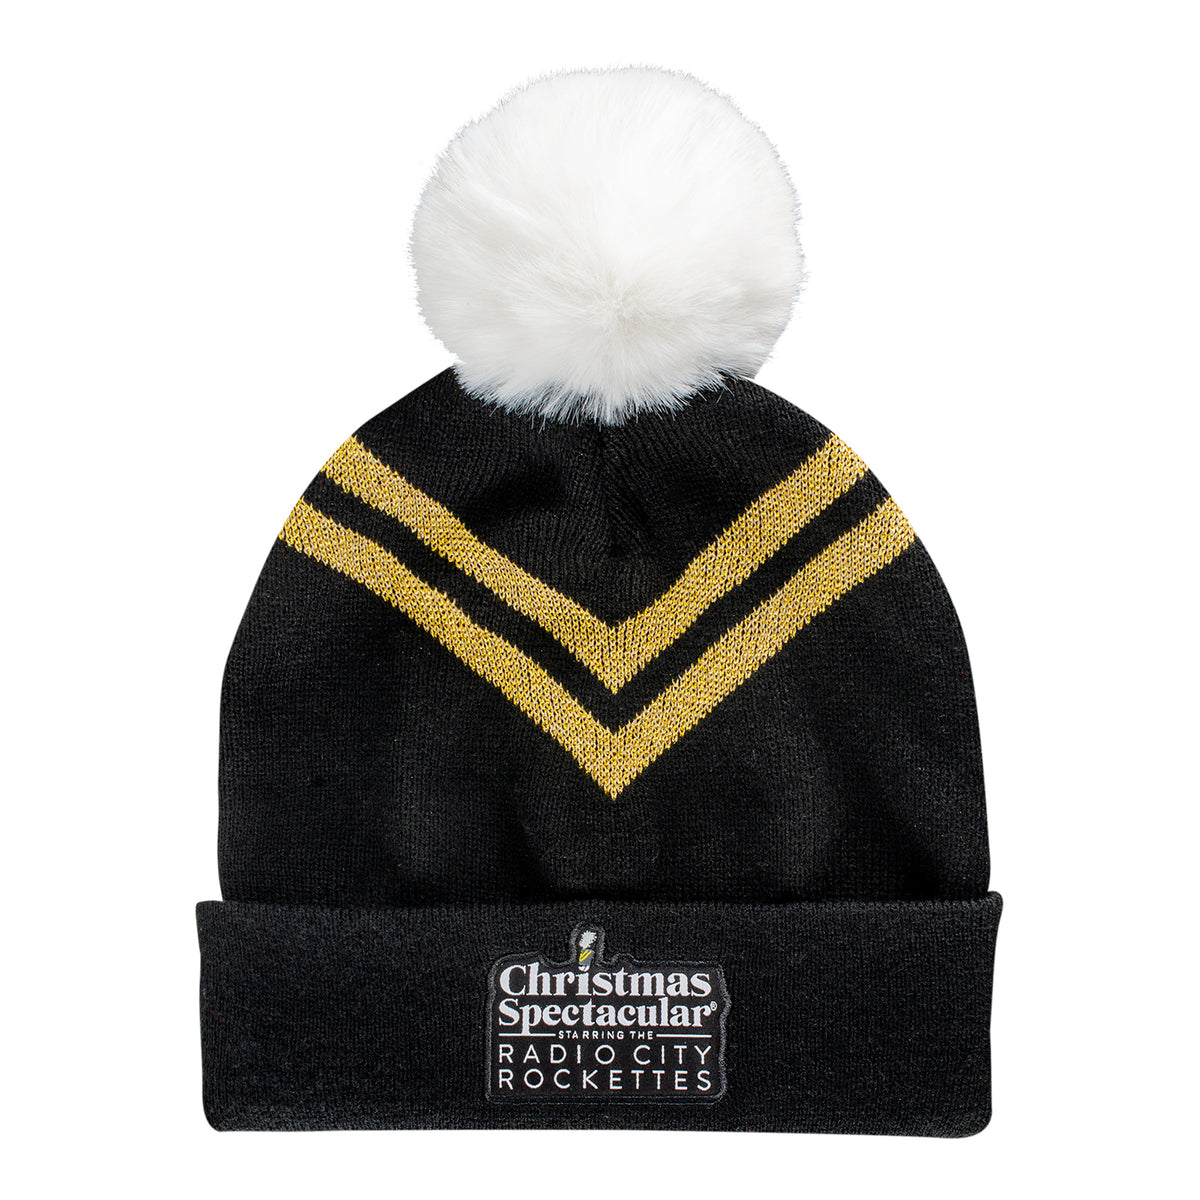 Radio City Rockettes Toy Soldier Christmas Beanie Hat for Kids